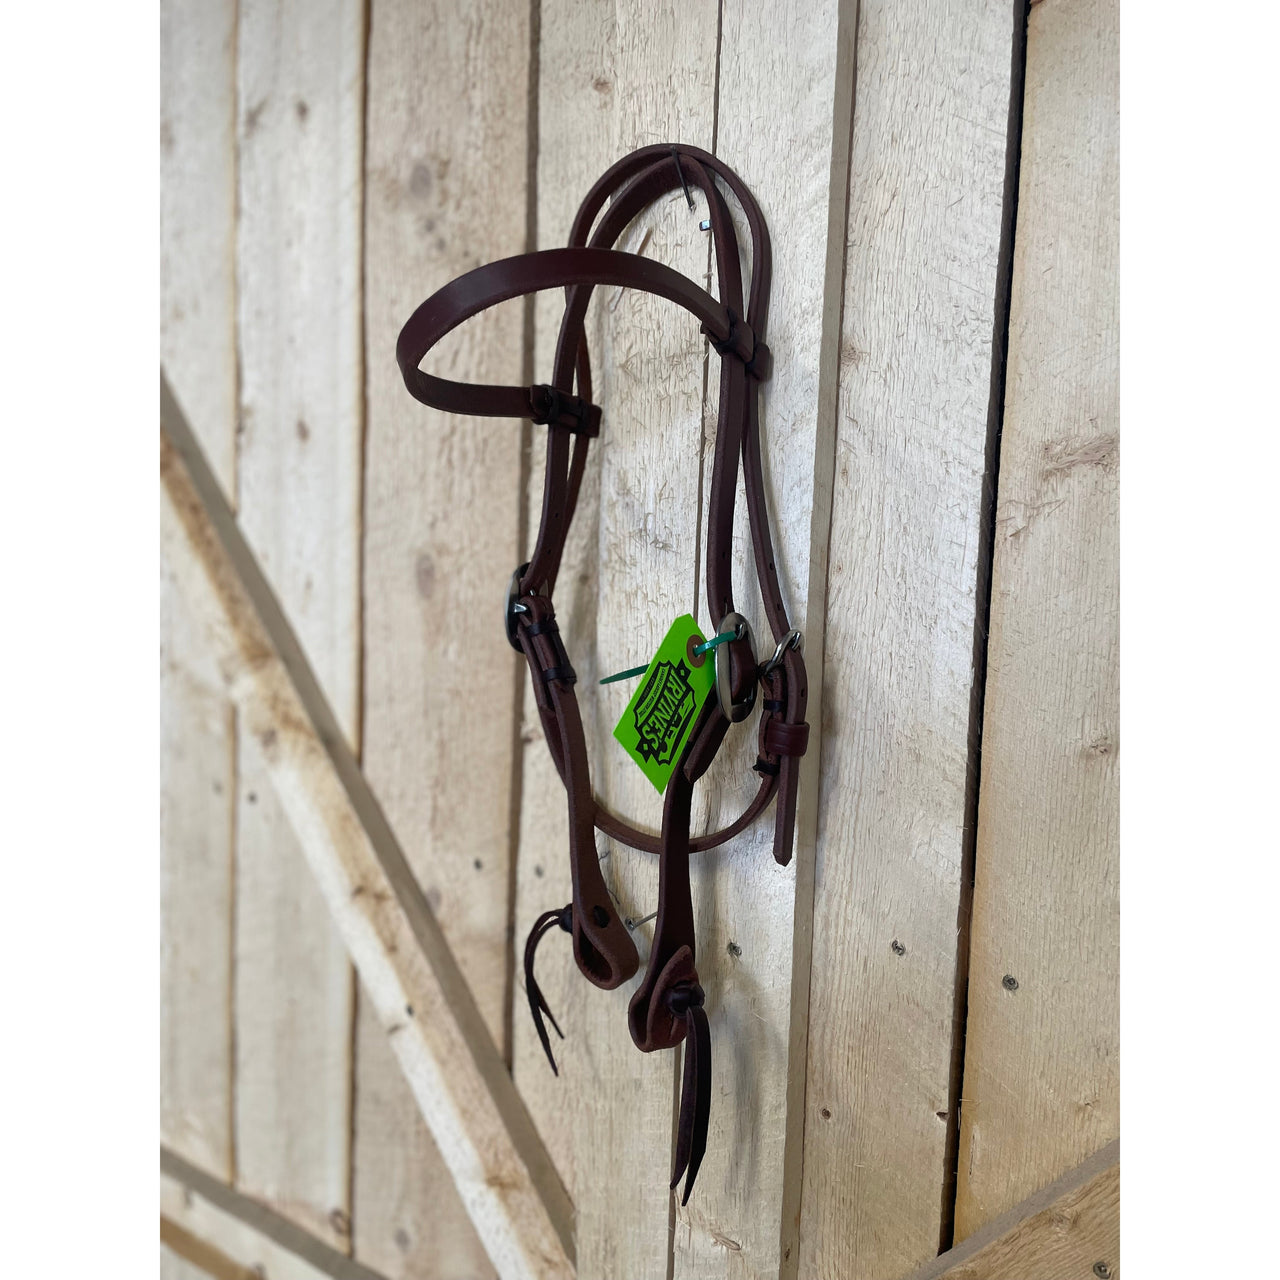 Irvine Browband Headstall w/Harness Pineapple Knot Ends - Dark Oil